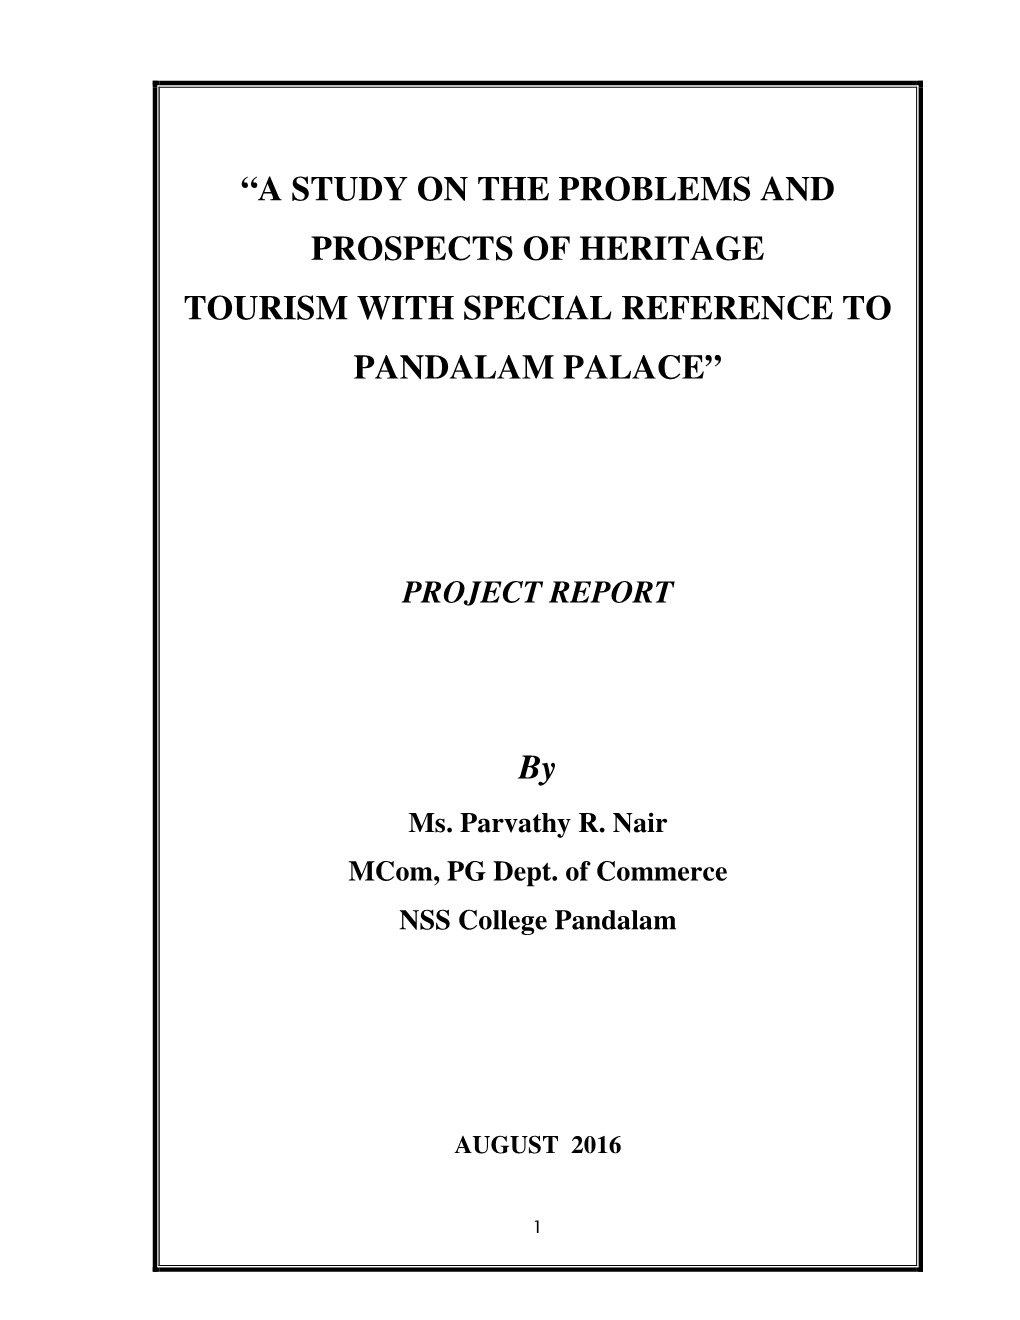 A Study on the Problems and Prospects of Heritage Tourism with Special Reference to Pandalam Palace”